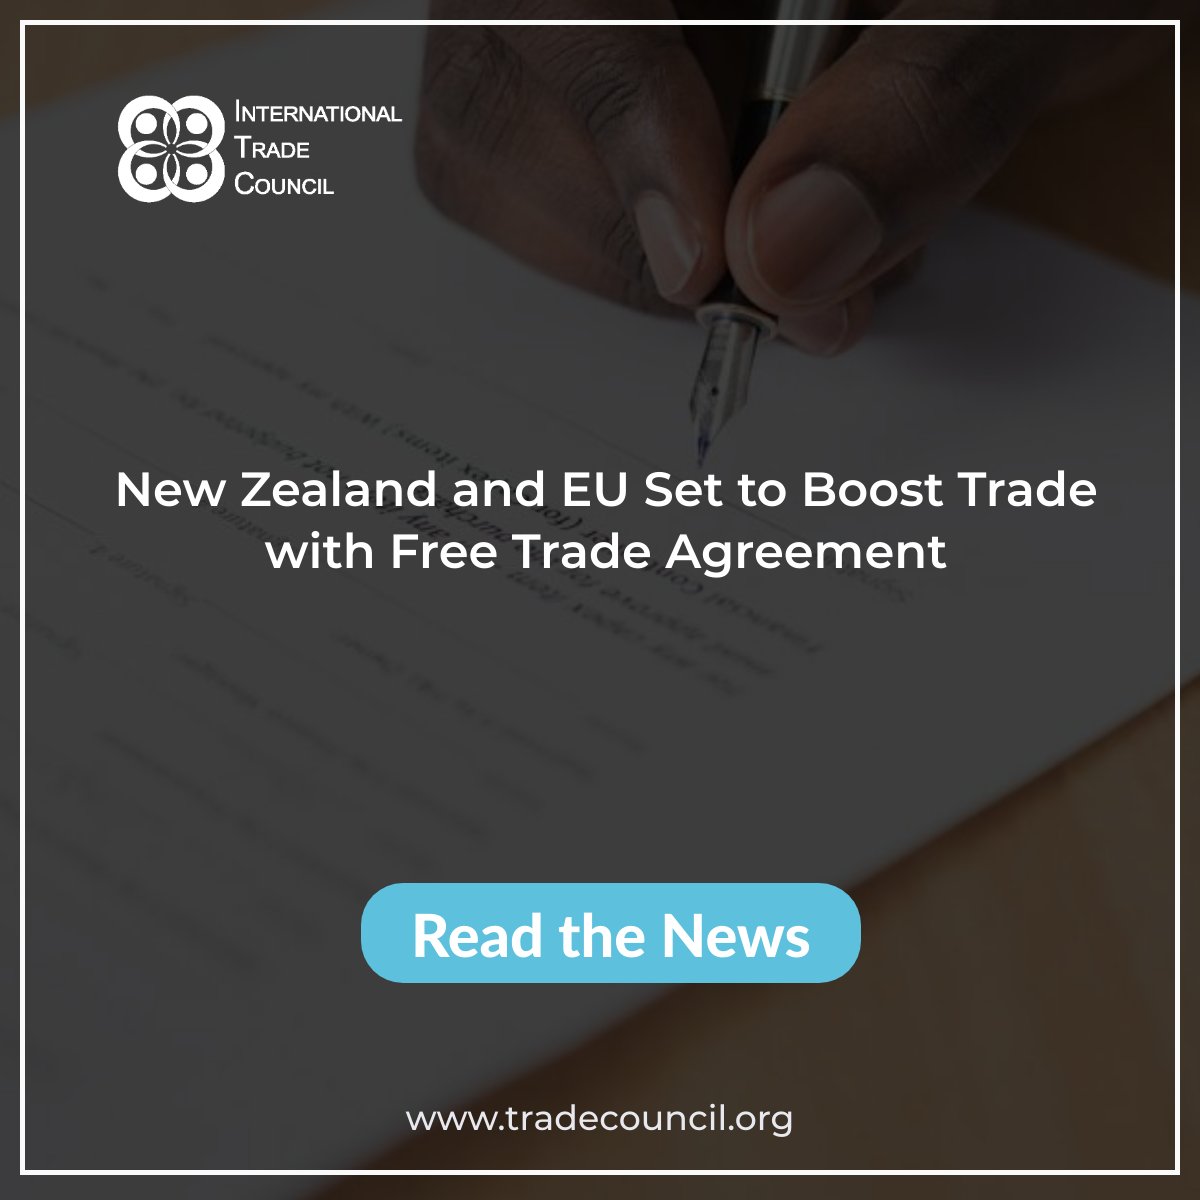 New Zealand and EU Set to Boost Trade with Free Trade Agreement
Read The News: tradecouncil.org/new-zealand-an…
#ITCNewsUpdate #TradeAgreement #NewZealandEU #EconomicBoost #InternationalTrade #NewsUpdate #InternationalTradeCouncil